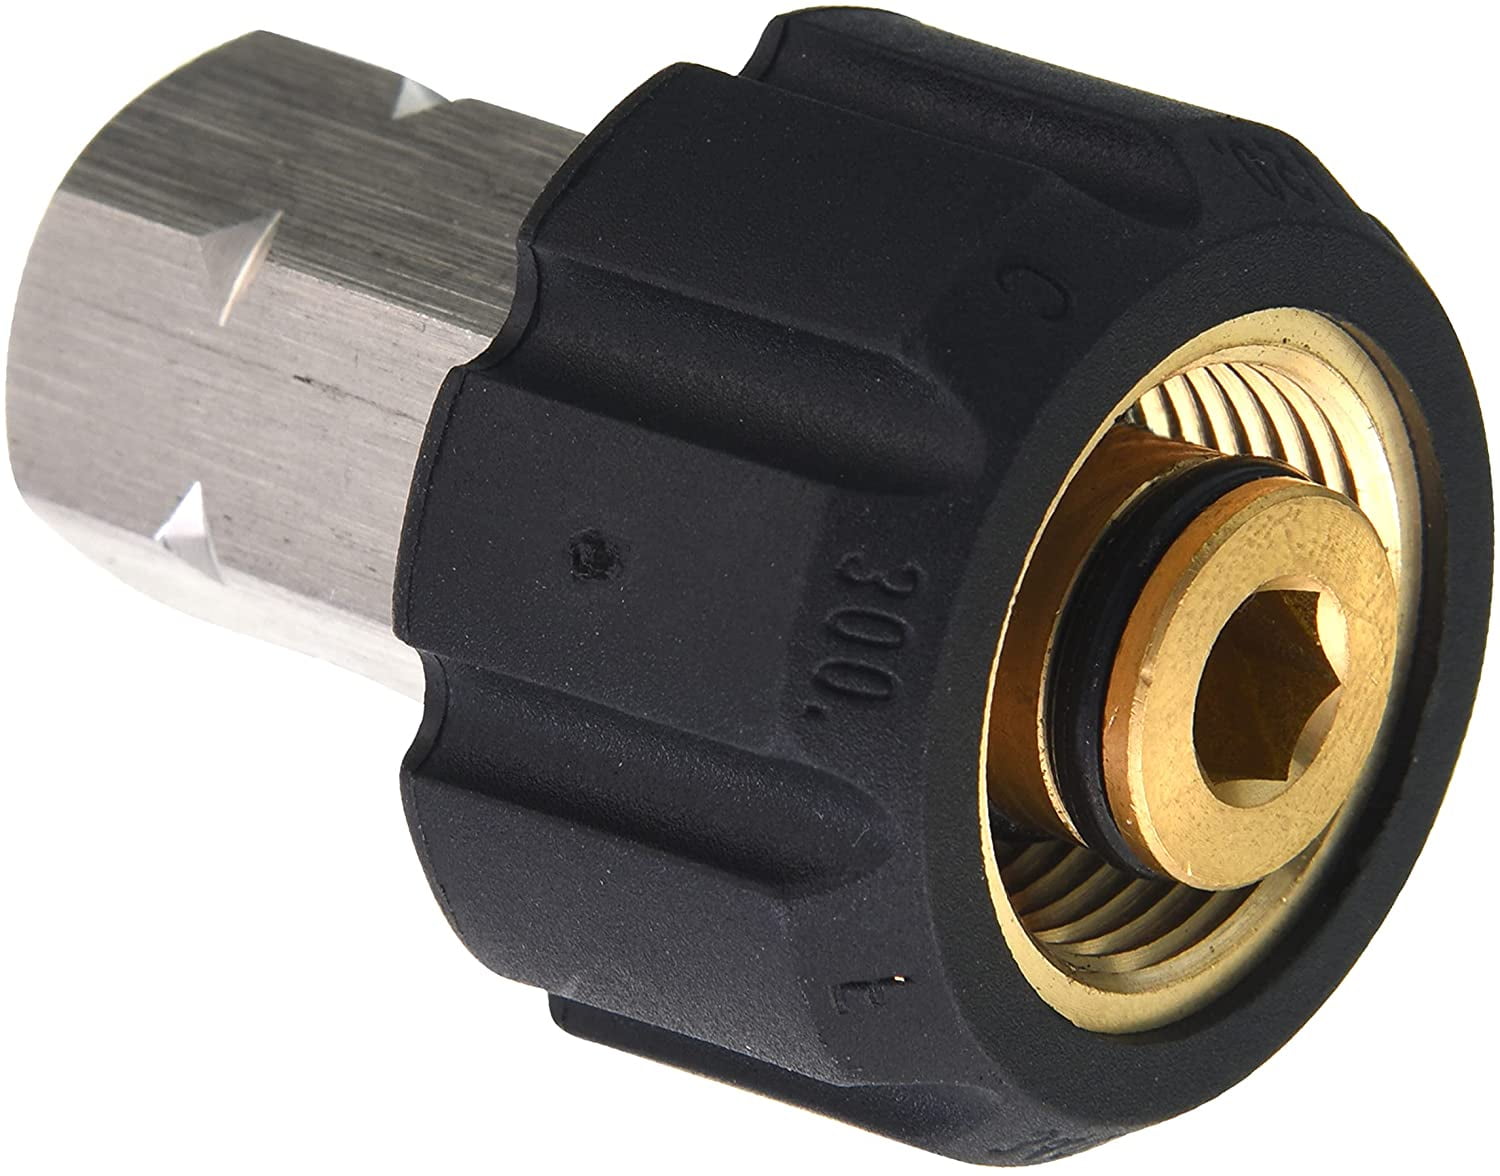 Male 3/8 To Female M22x1.5 Socket 14mm Wash Jet Adapter Pressure Washer 